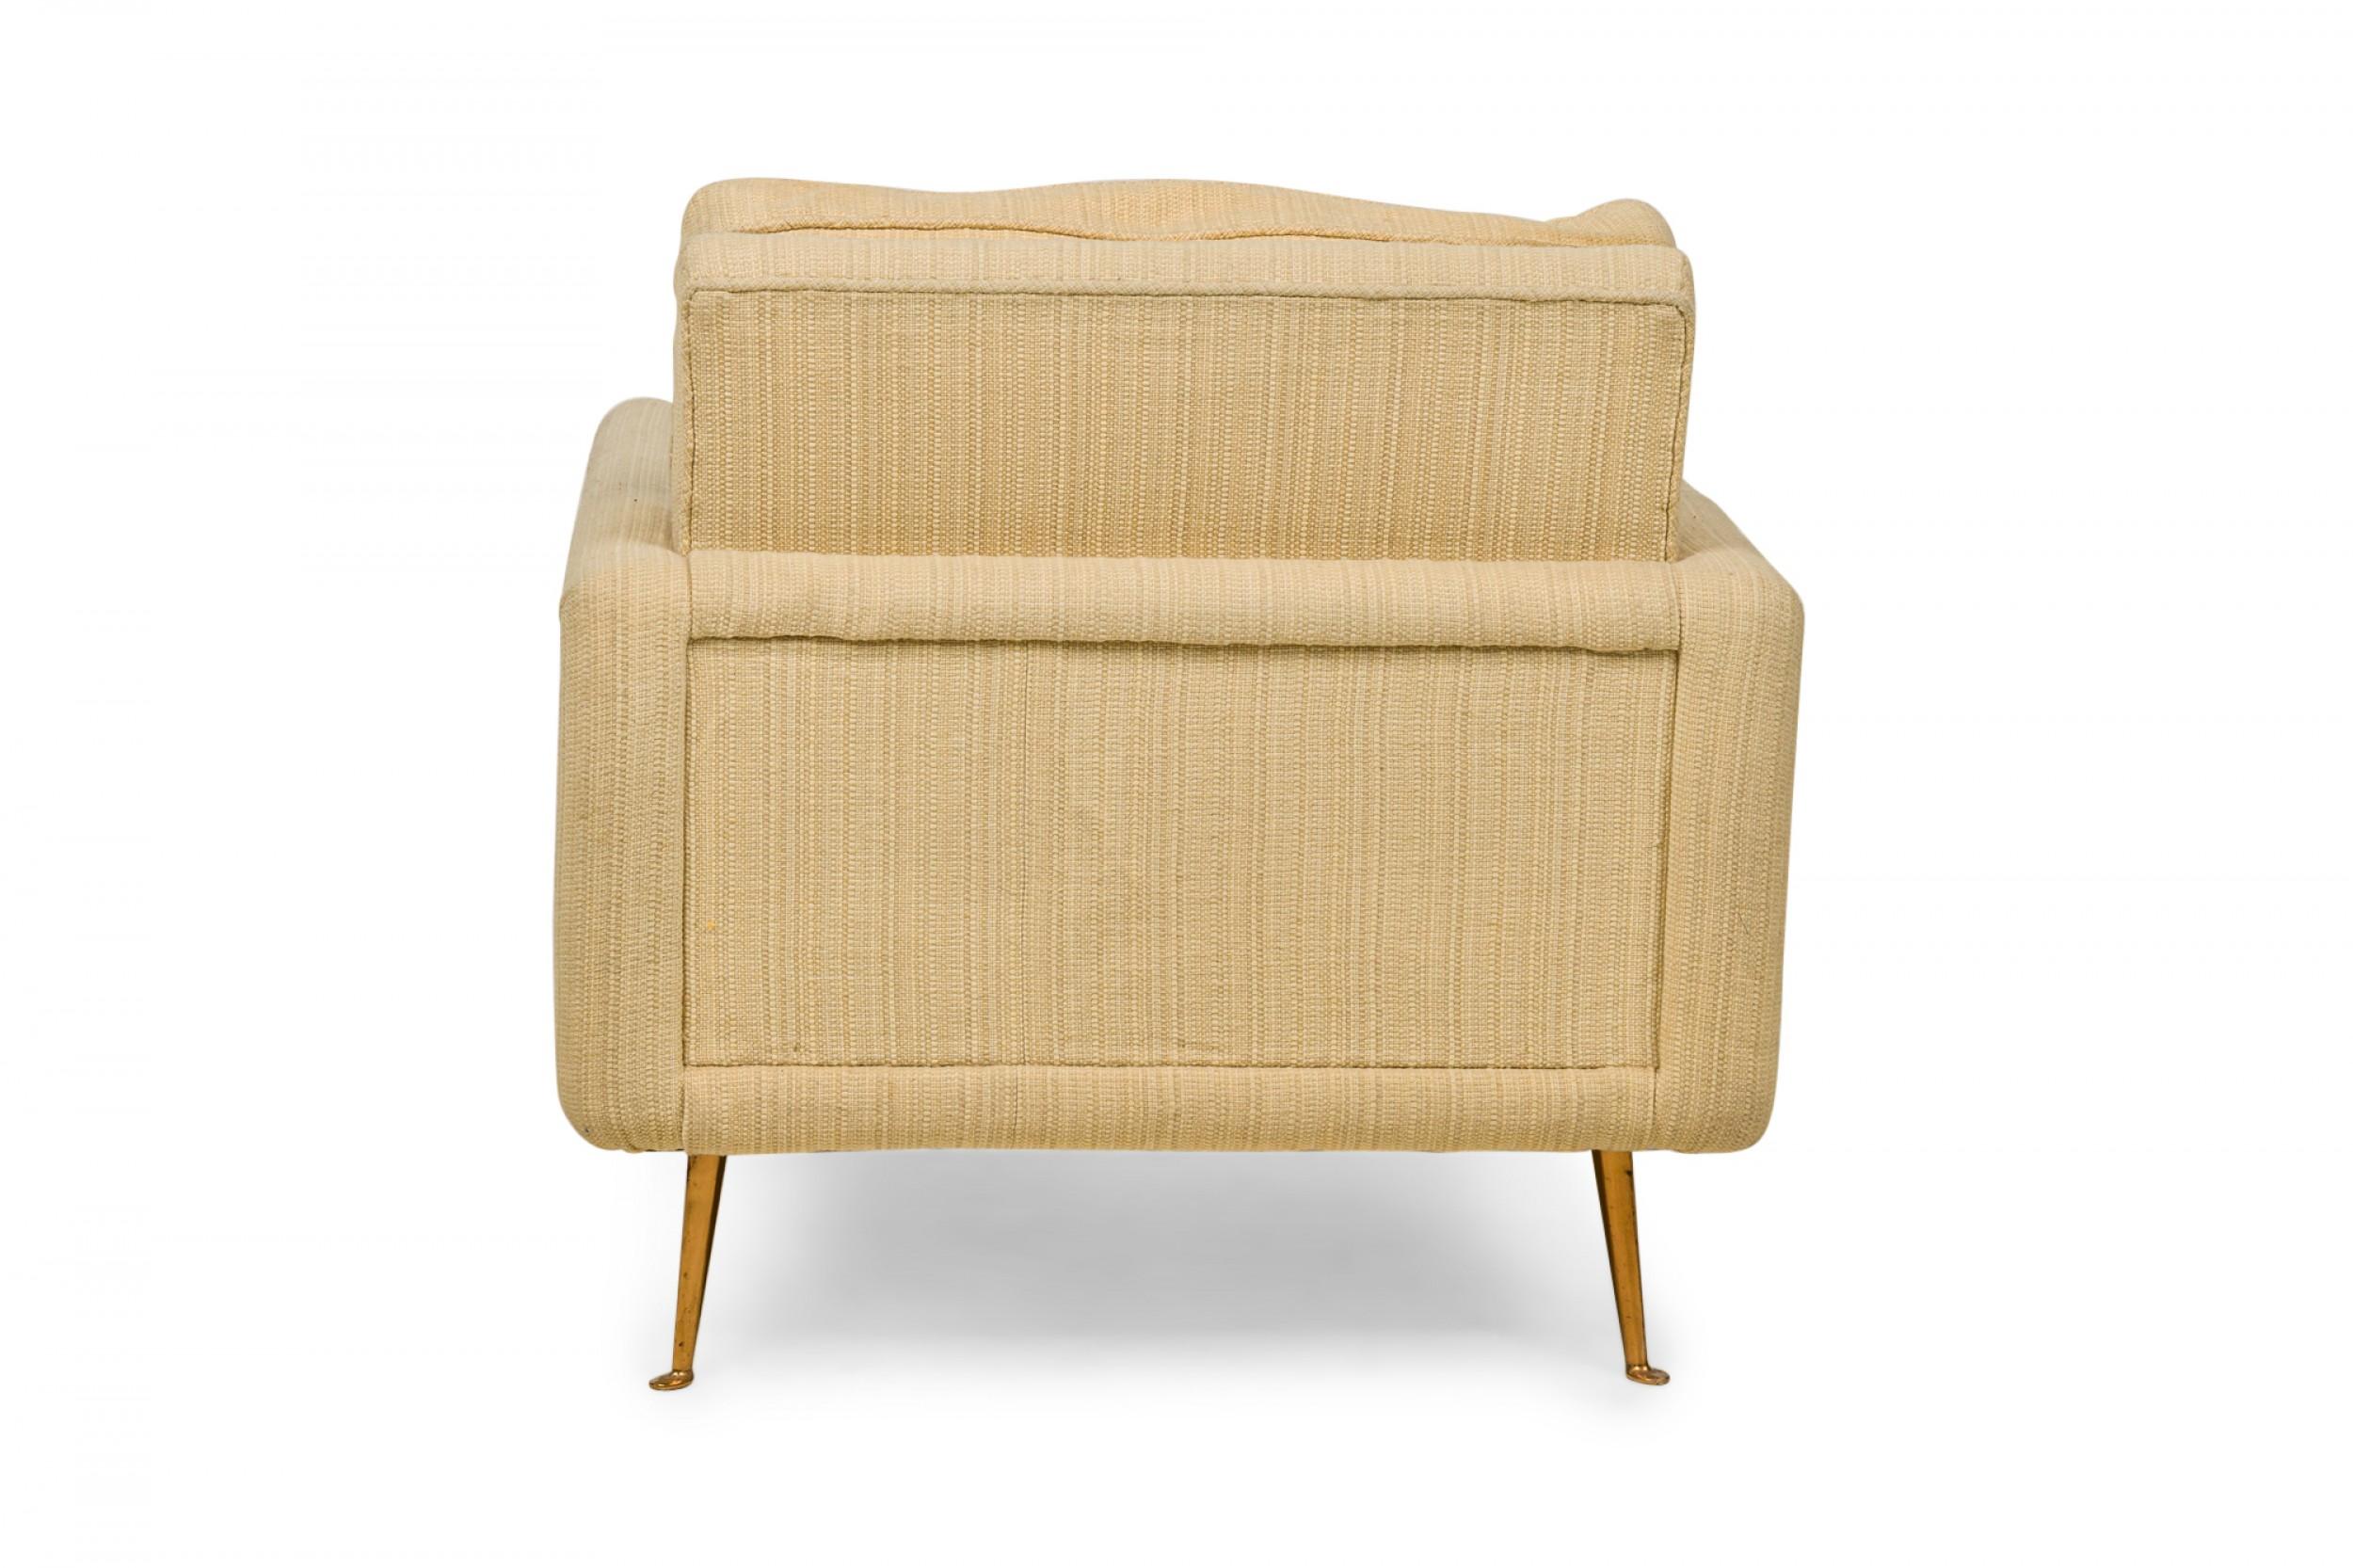 20th Century American Contemporary Beige Fabric Upholstered Bronze Leg Lounge / Armchair For Sale